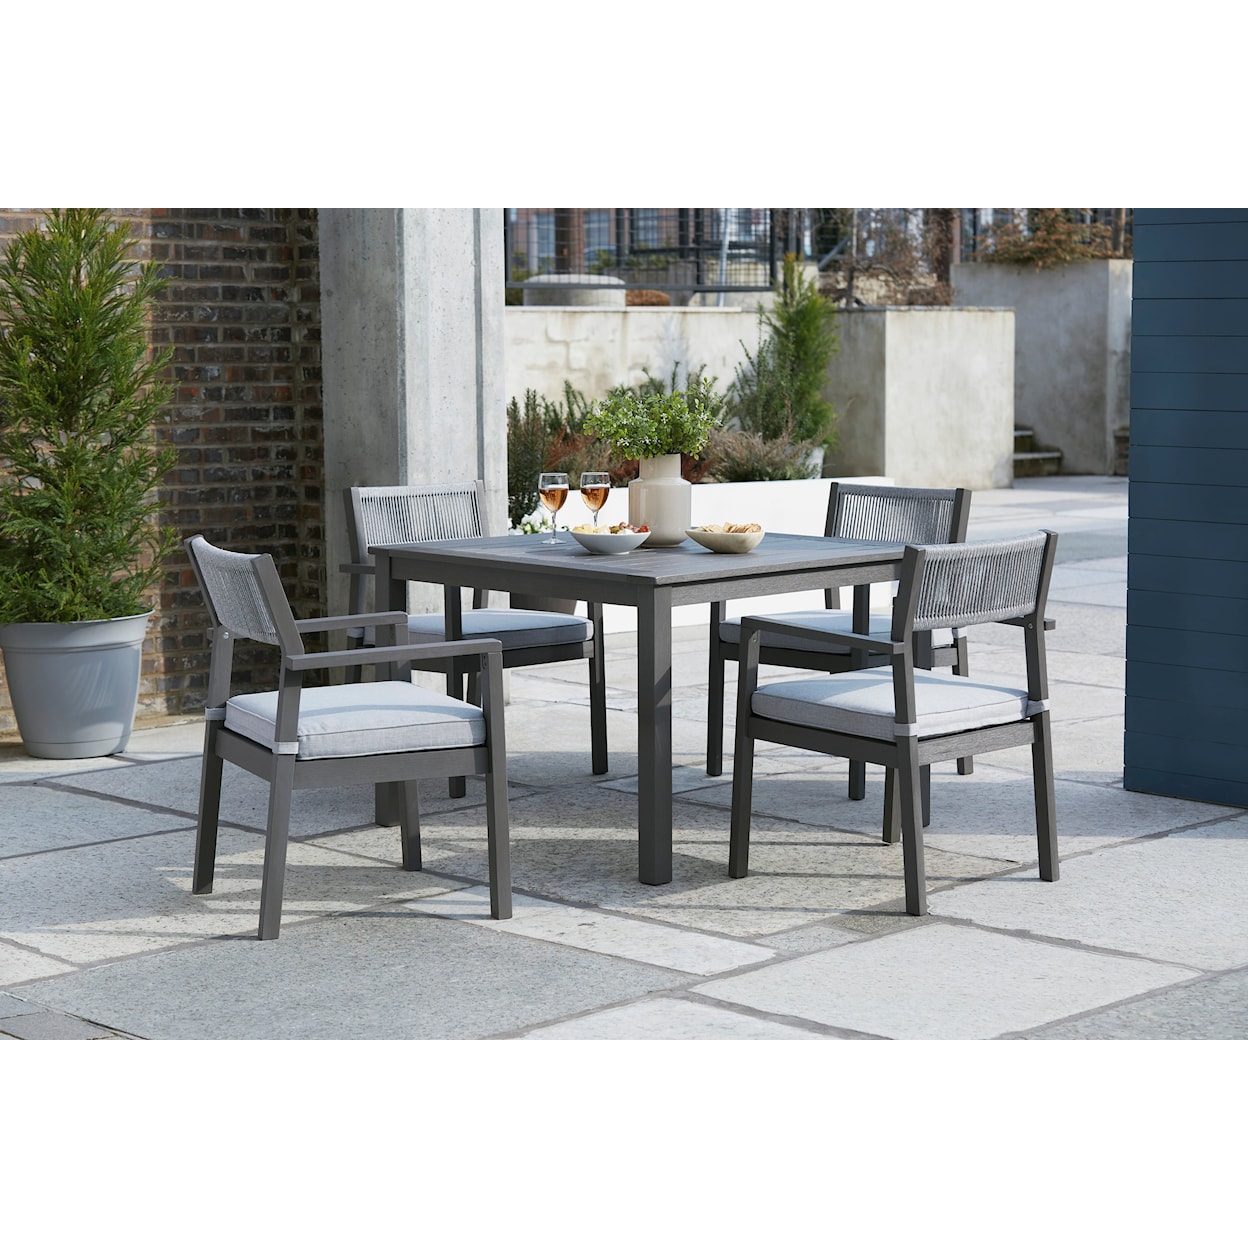 Signature Design by Ashley Eden Town Outdoor Dining Set